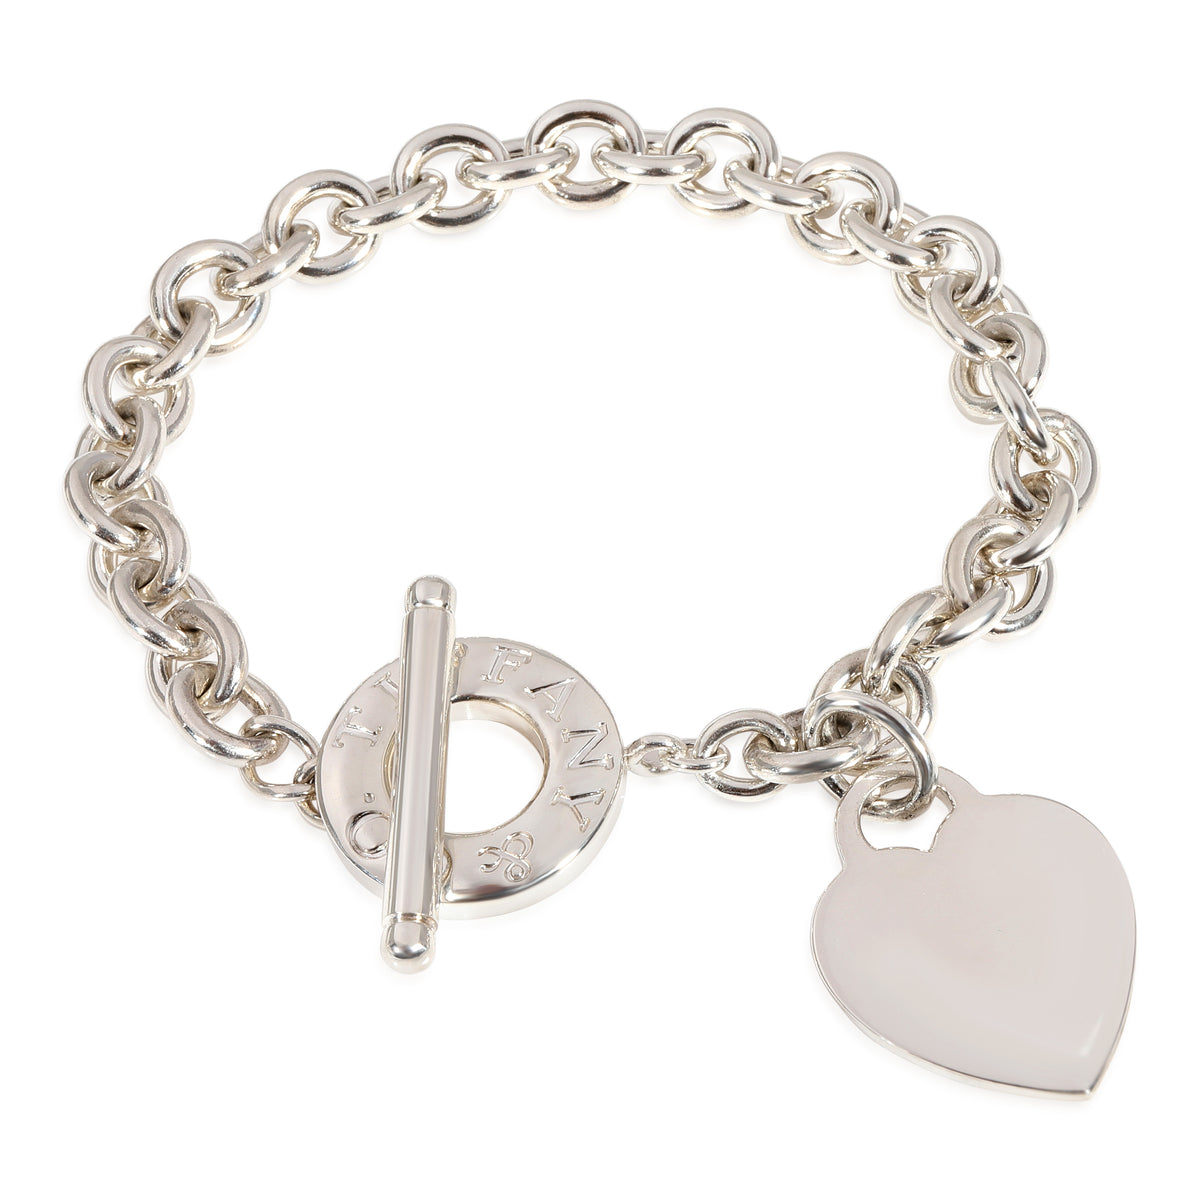 Tiffany & Co. Heart Tag Bracelet With Toggle Clasp in Sterling Silver